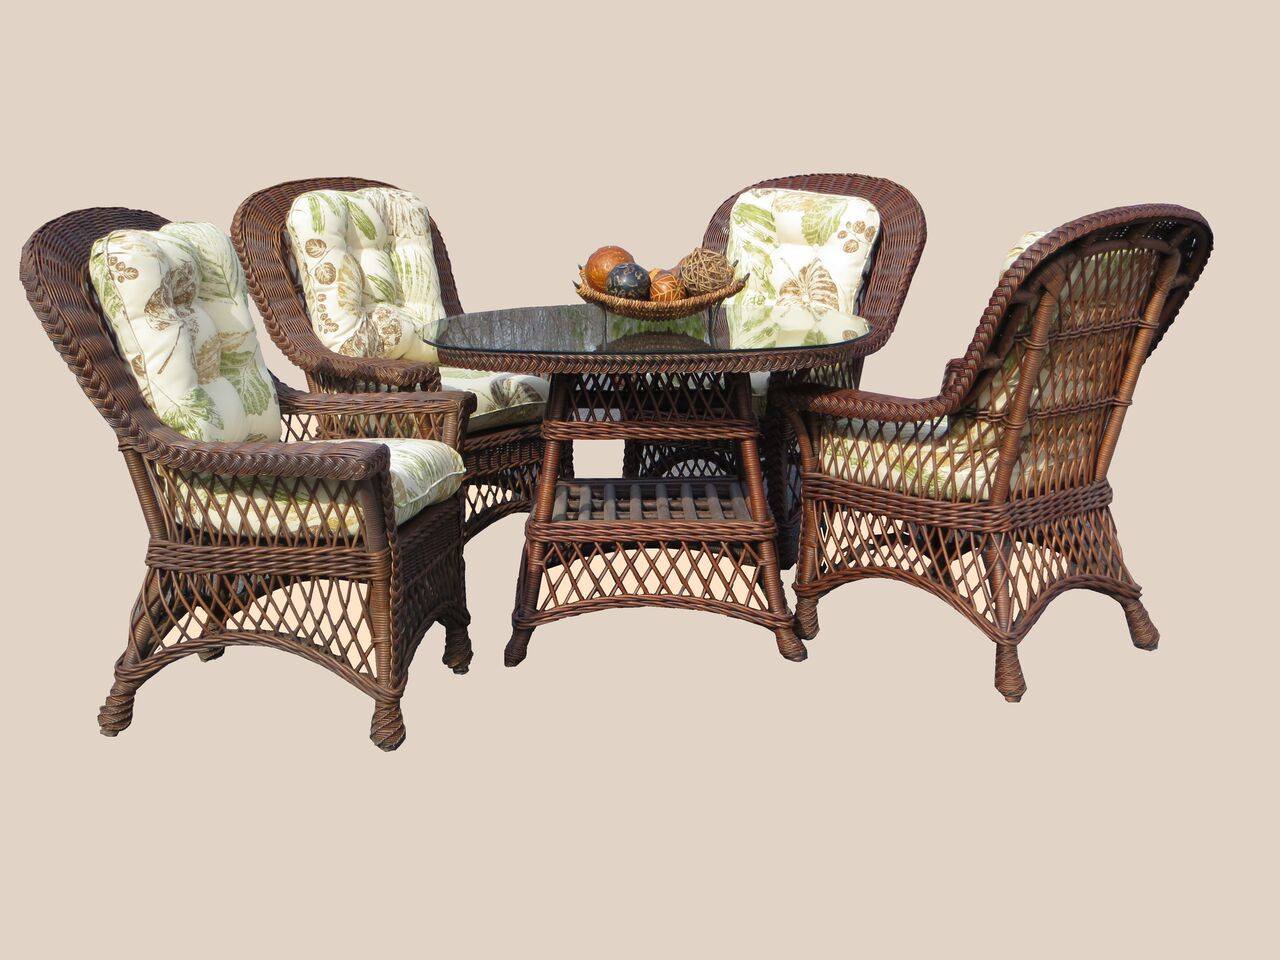 Spice Islands Spice Islands Bar Harbor 5 Piece Dining Set With 42" Glass Brownwash By Spice Islands Wicker Dining Set - Rattan Imports